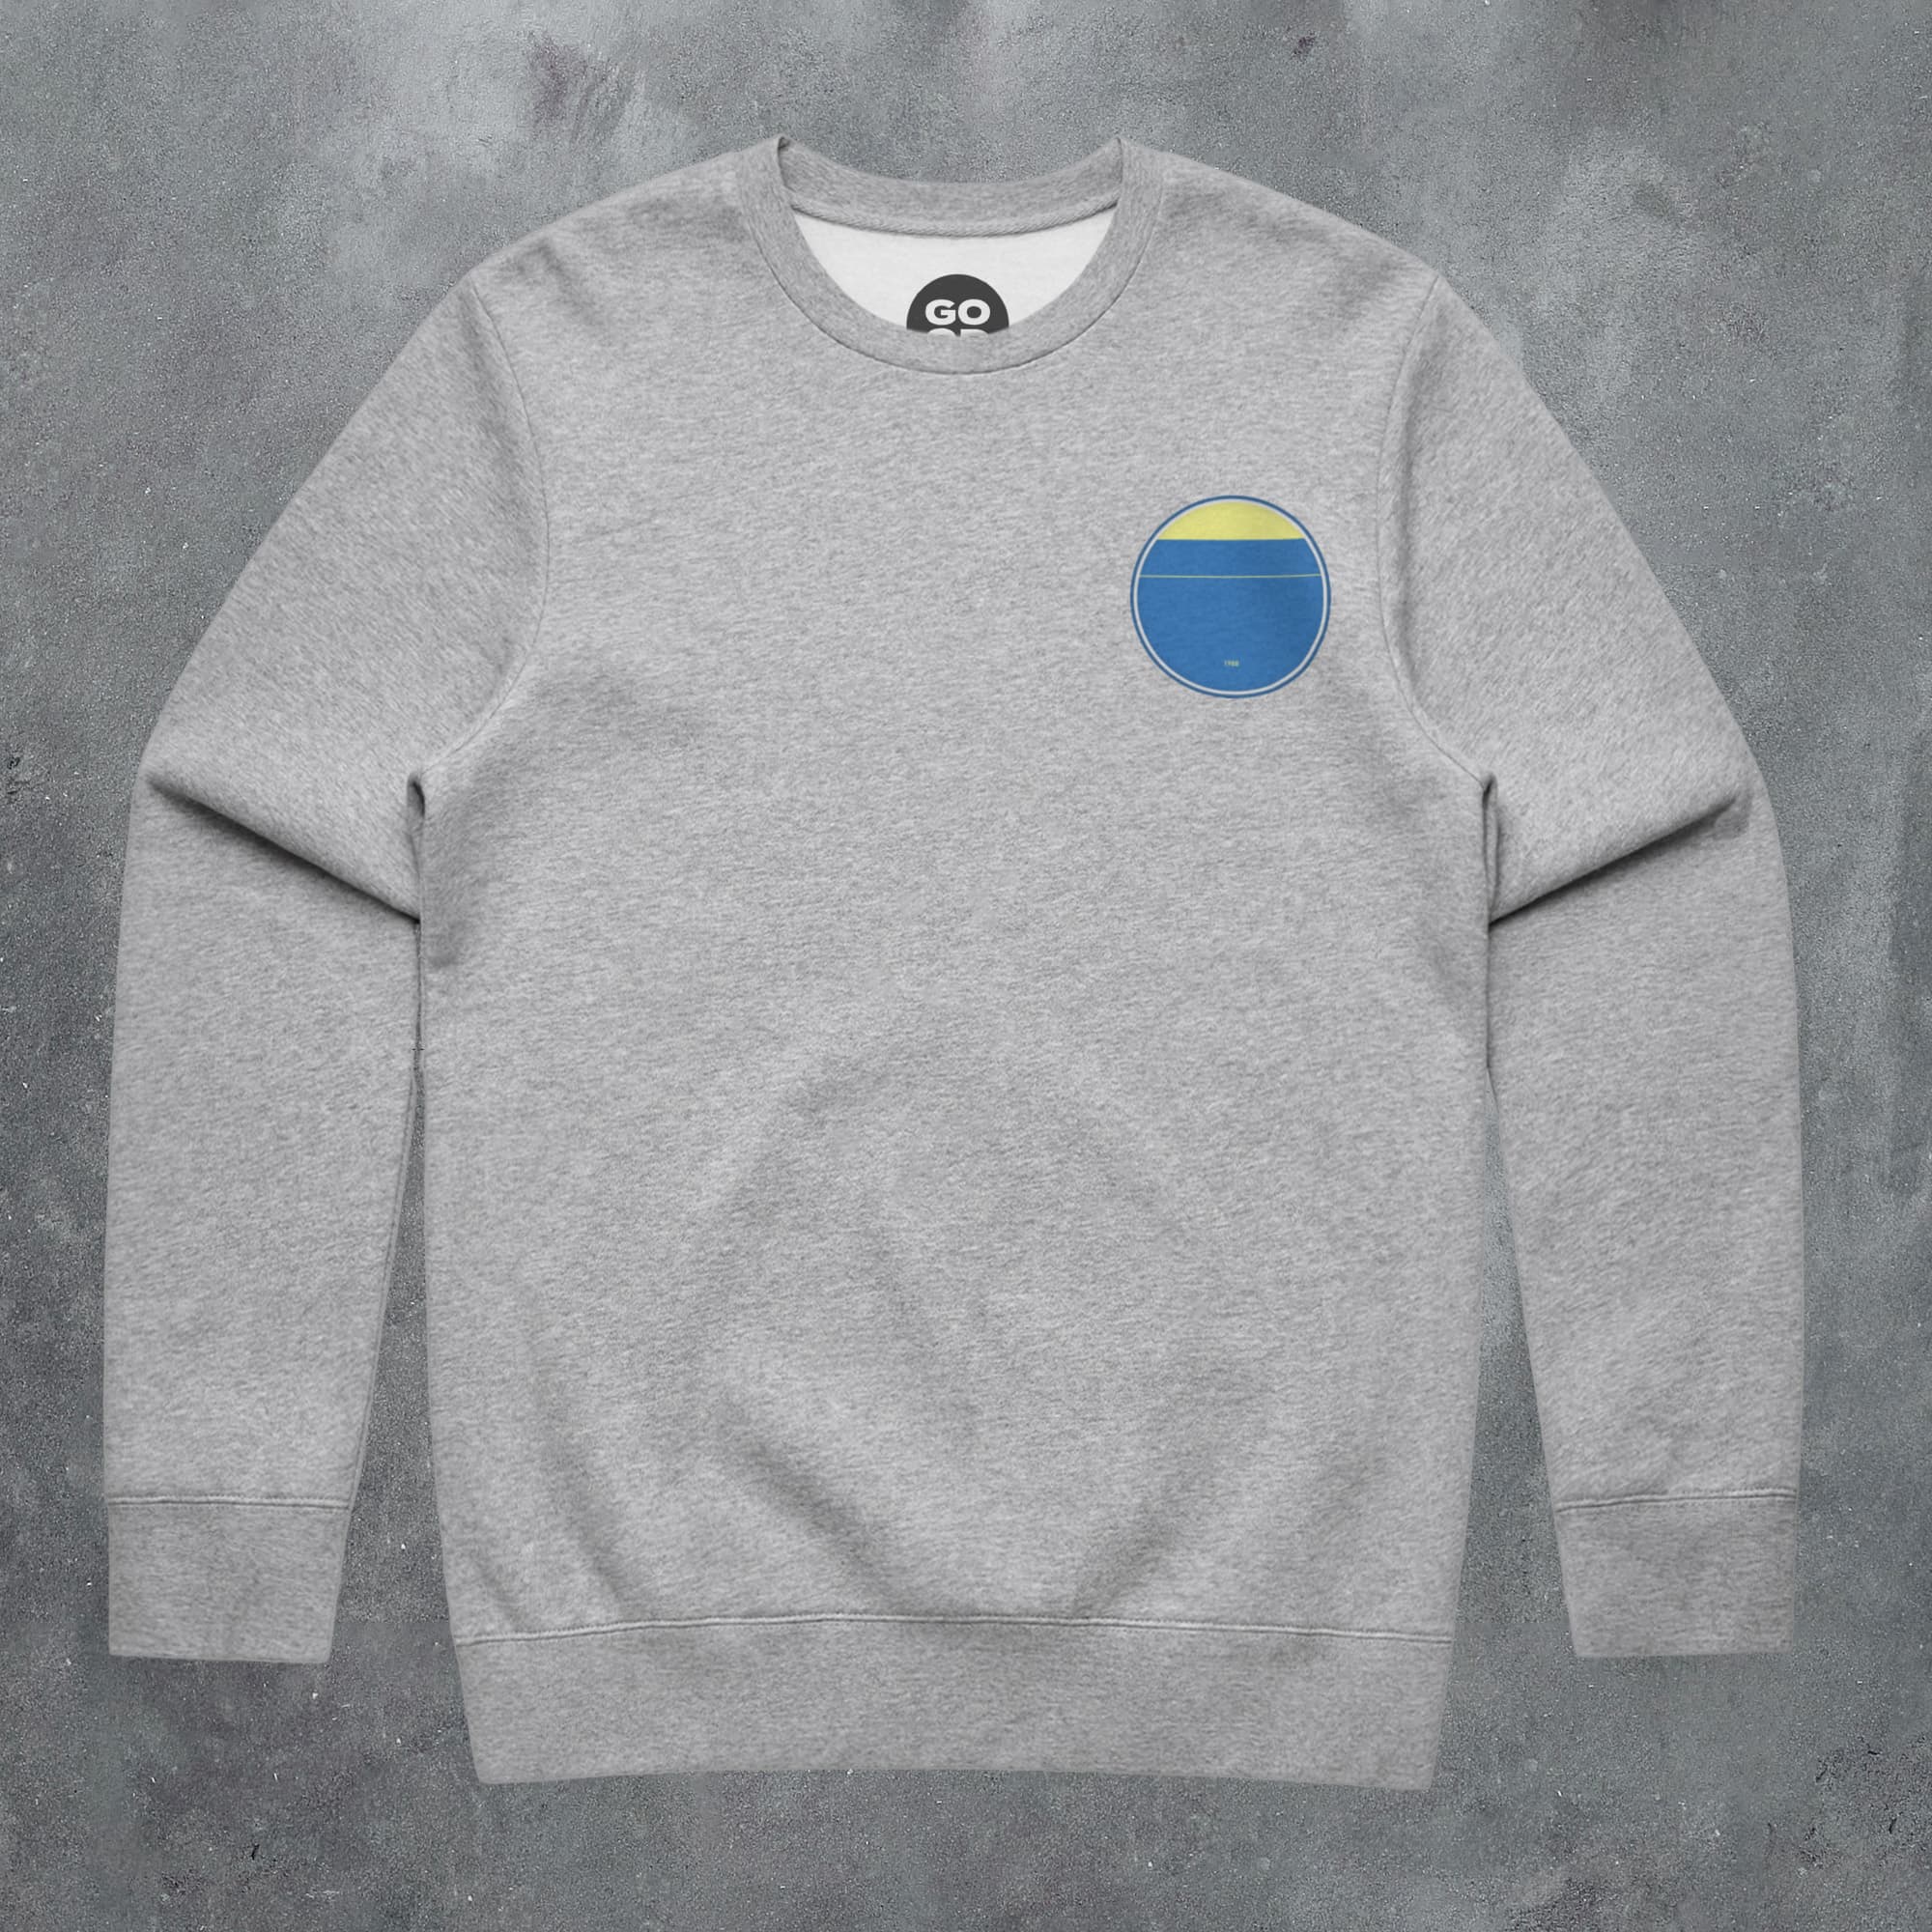 a grey sweatshirt with a blue and yellow circle on it